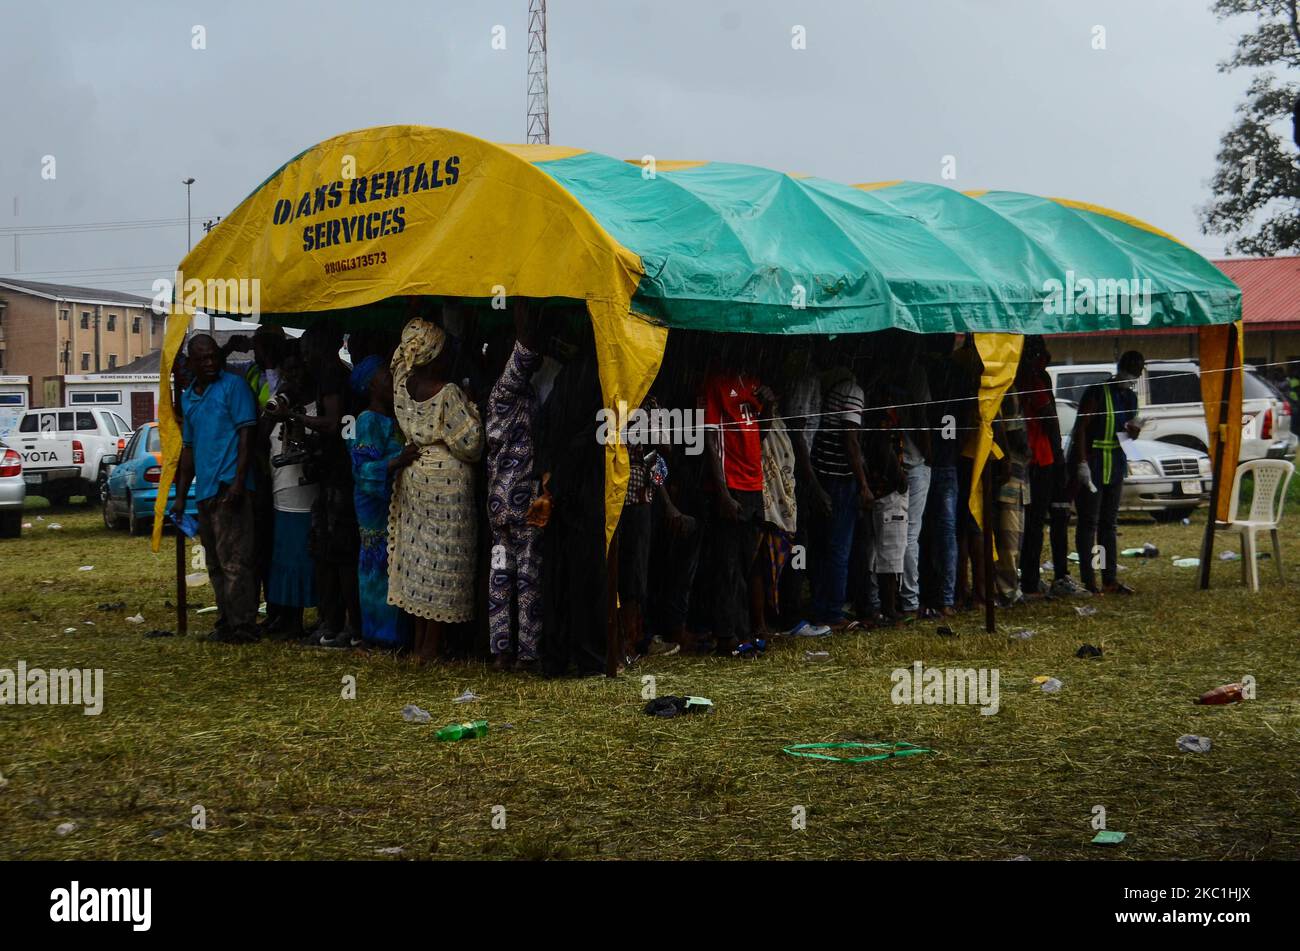 Voters wait under a canopy as rain disrupt voting process at scared heart primary in schoolGbogi/Isikan, in Akure South Ondo State on October 9, 2020. (Photo by Olukayode Jaiyeola/NurPhoto) Stock Photo